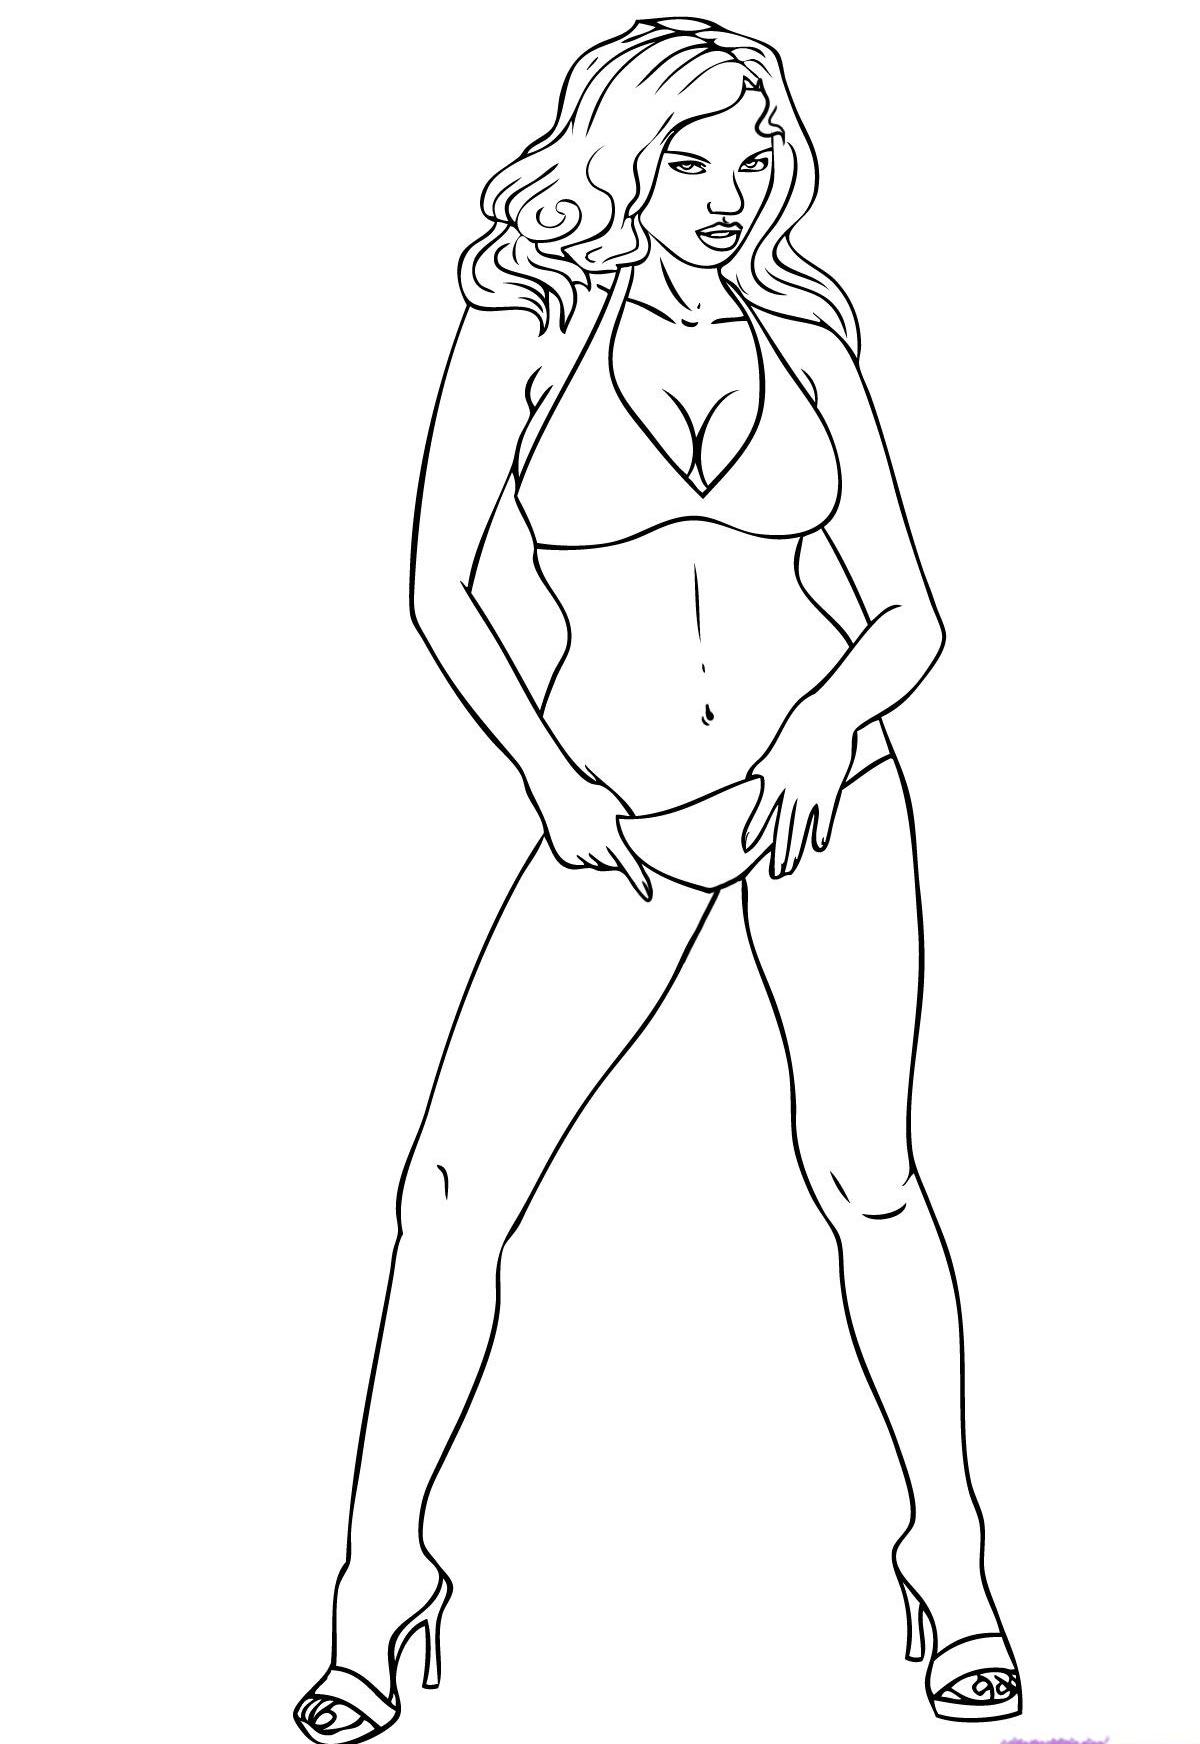 how-to-draw-a-sexy-girl-step-4_1_000000001389_5